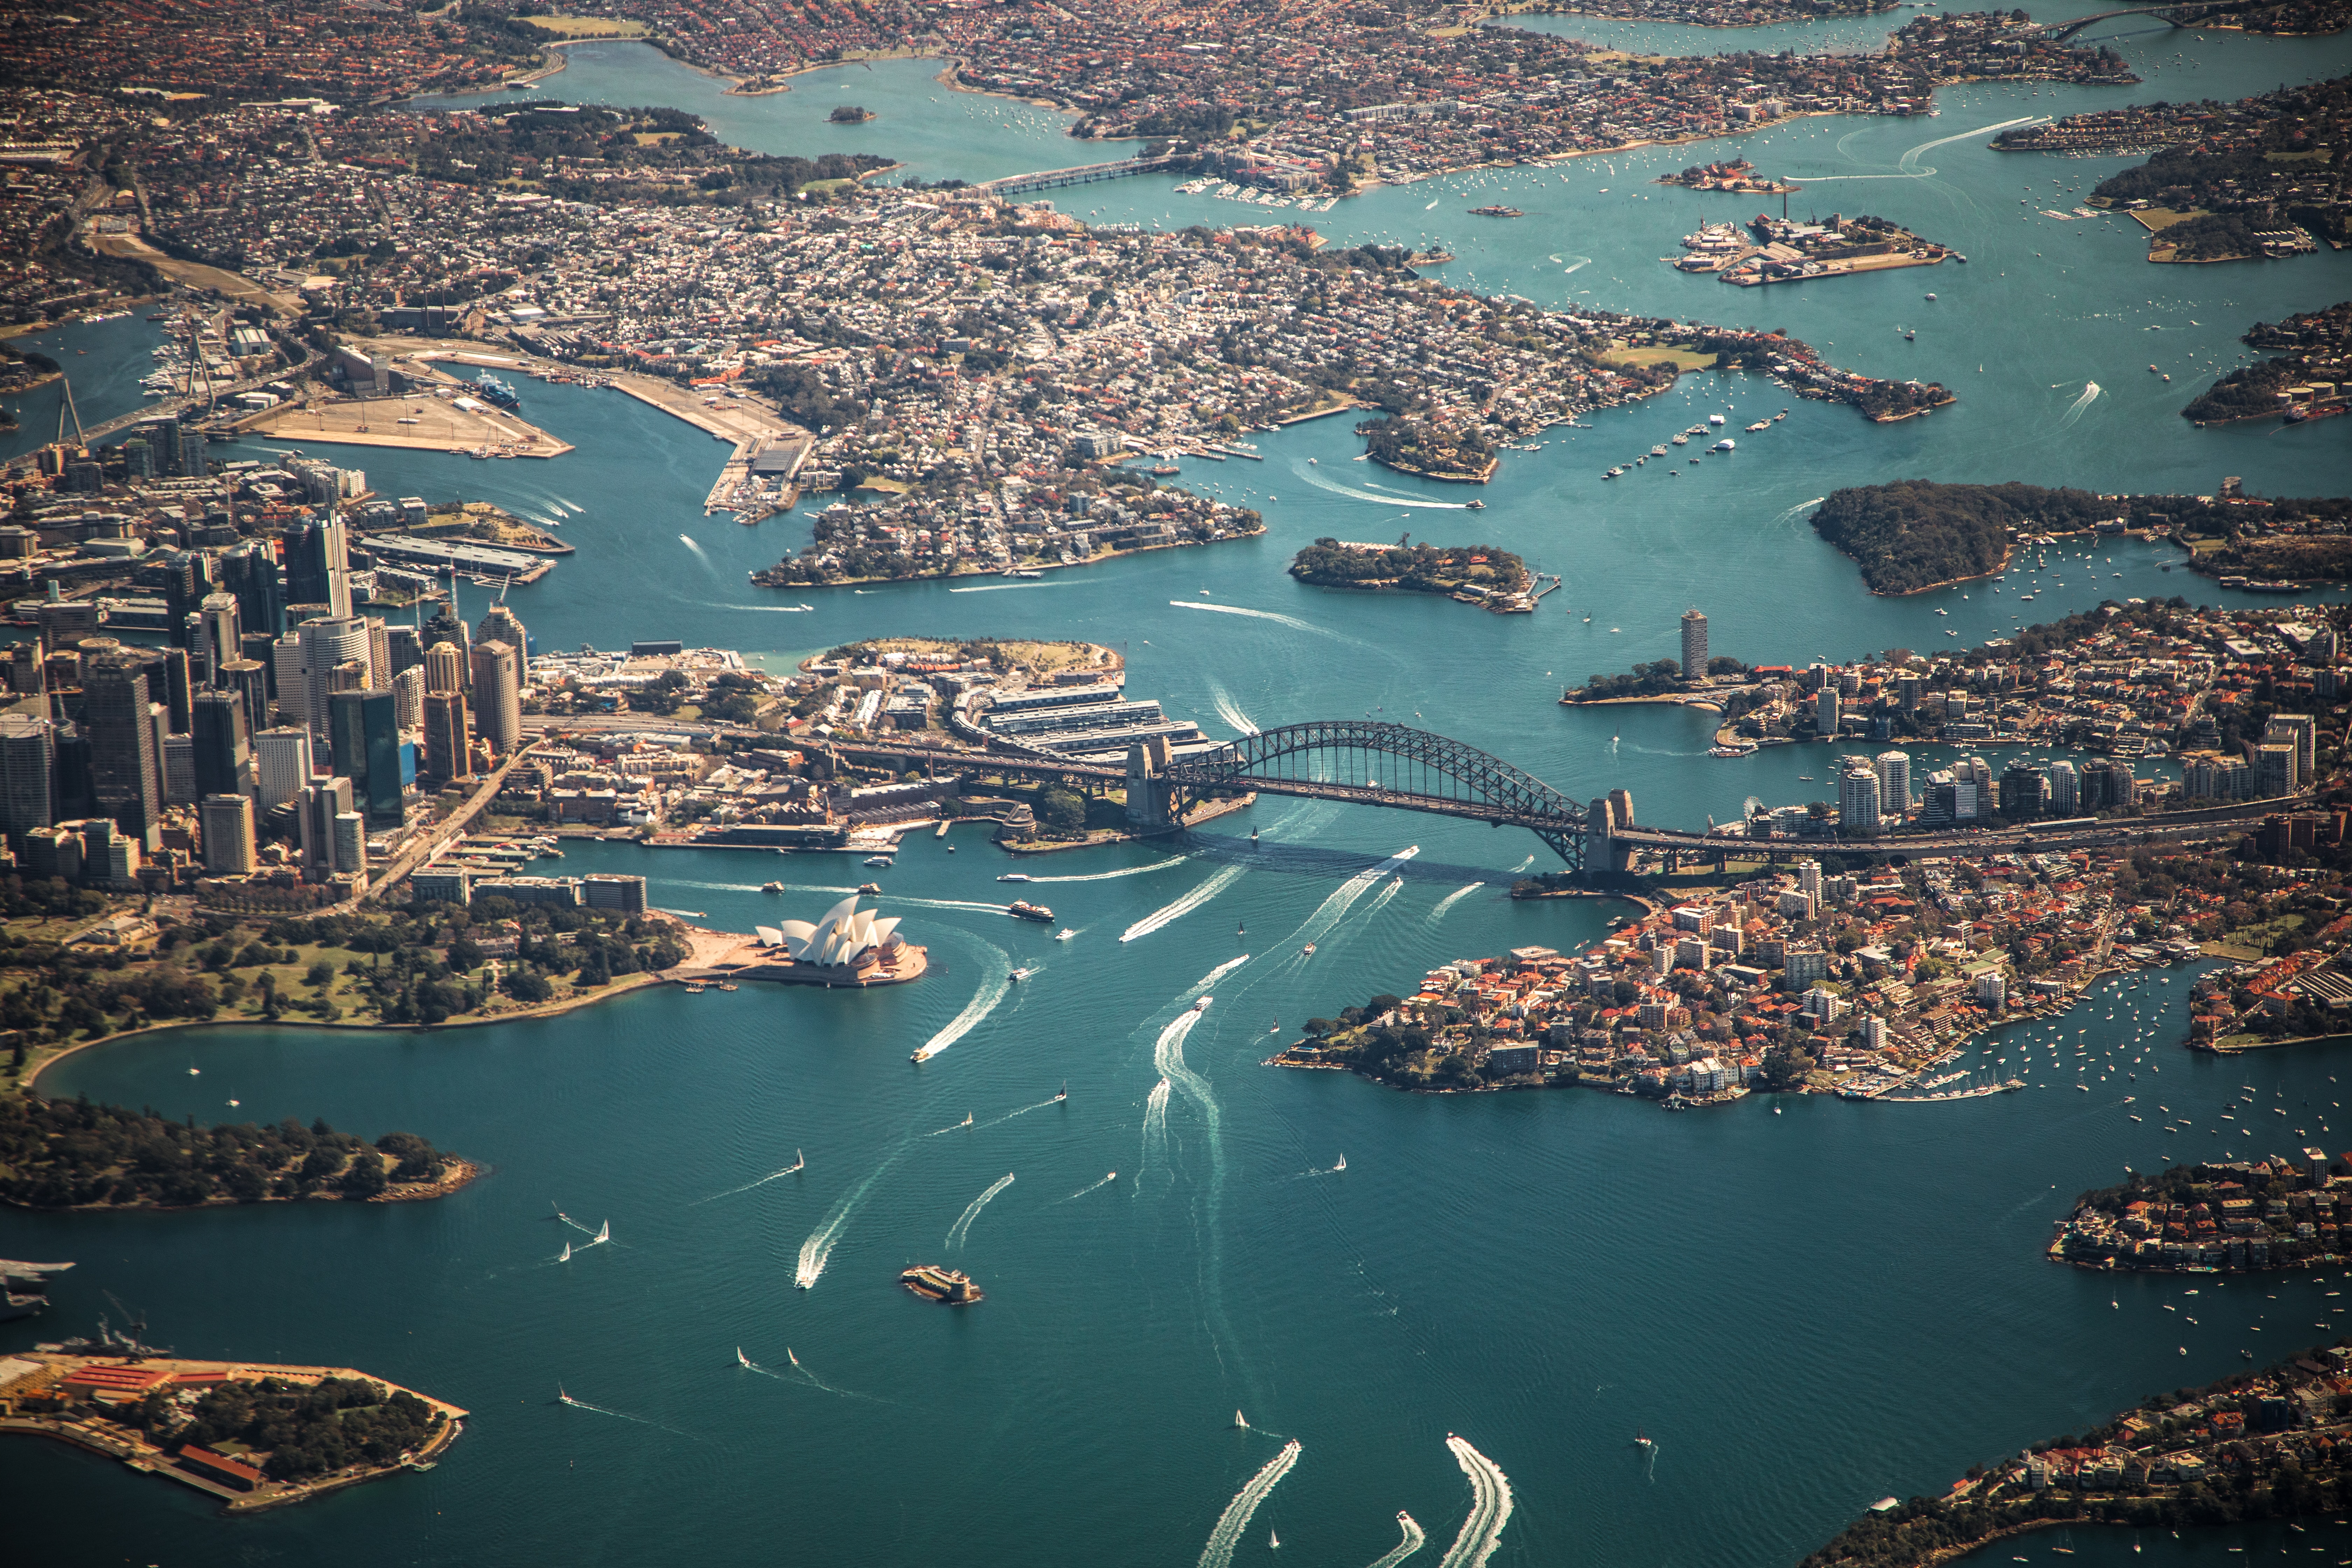 An overhead view of Sydney Harbor